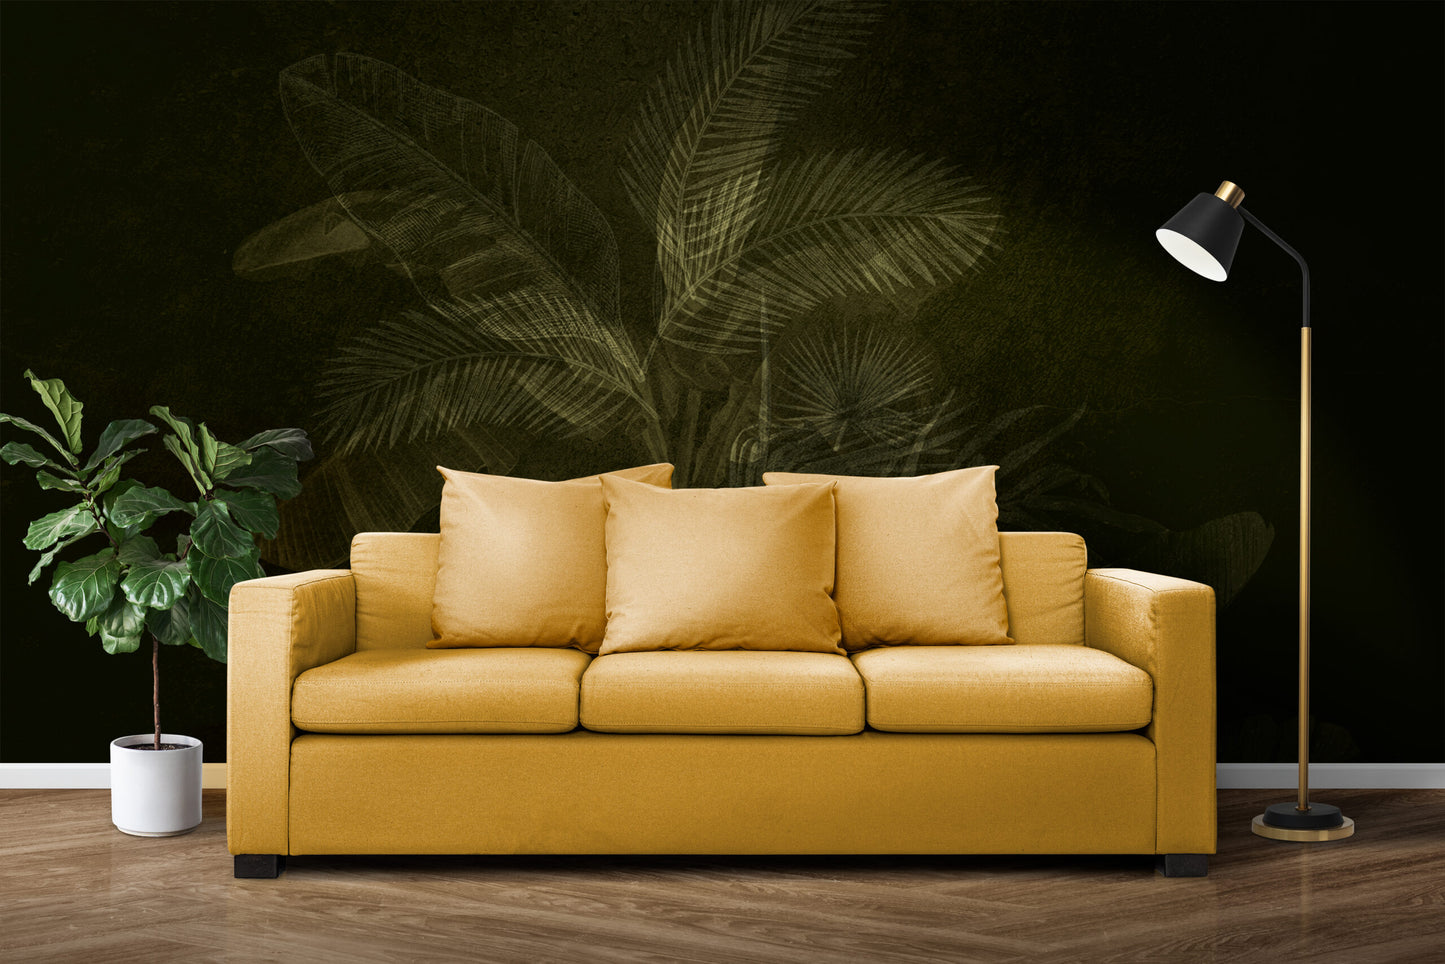 Humid Jungle Wallpaper Collection I Gold Touches